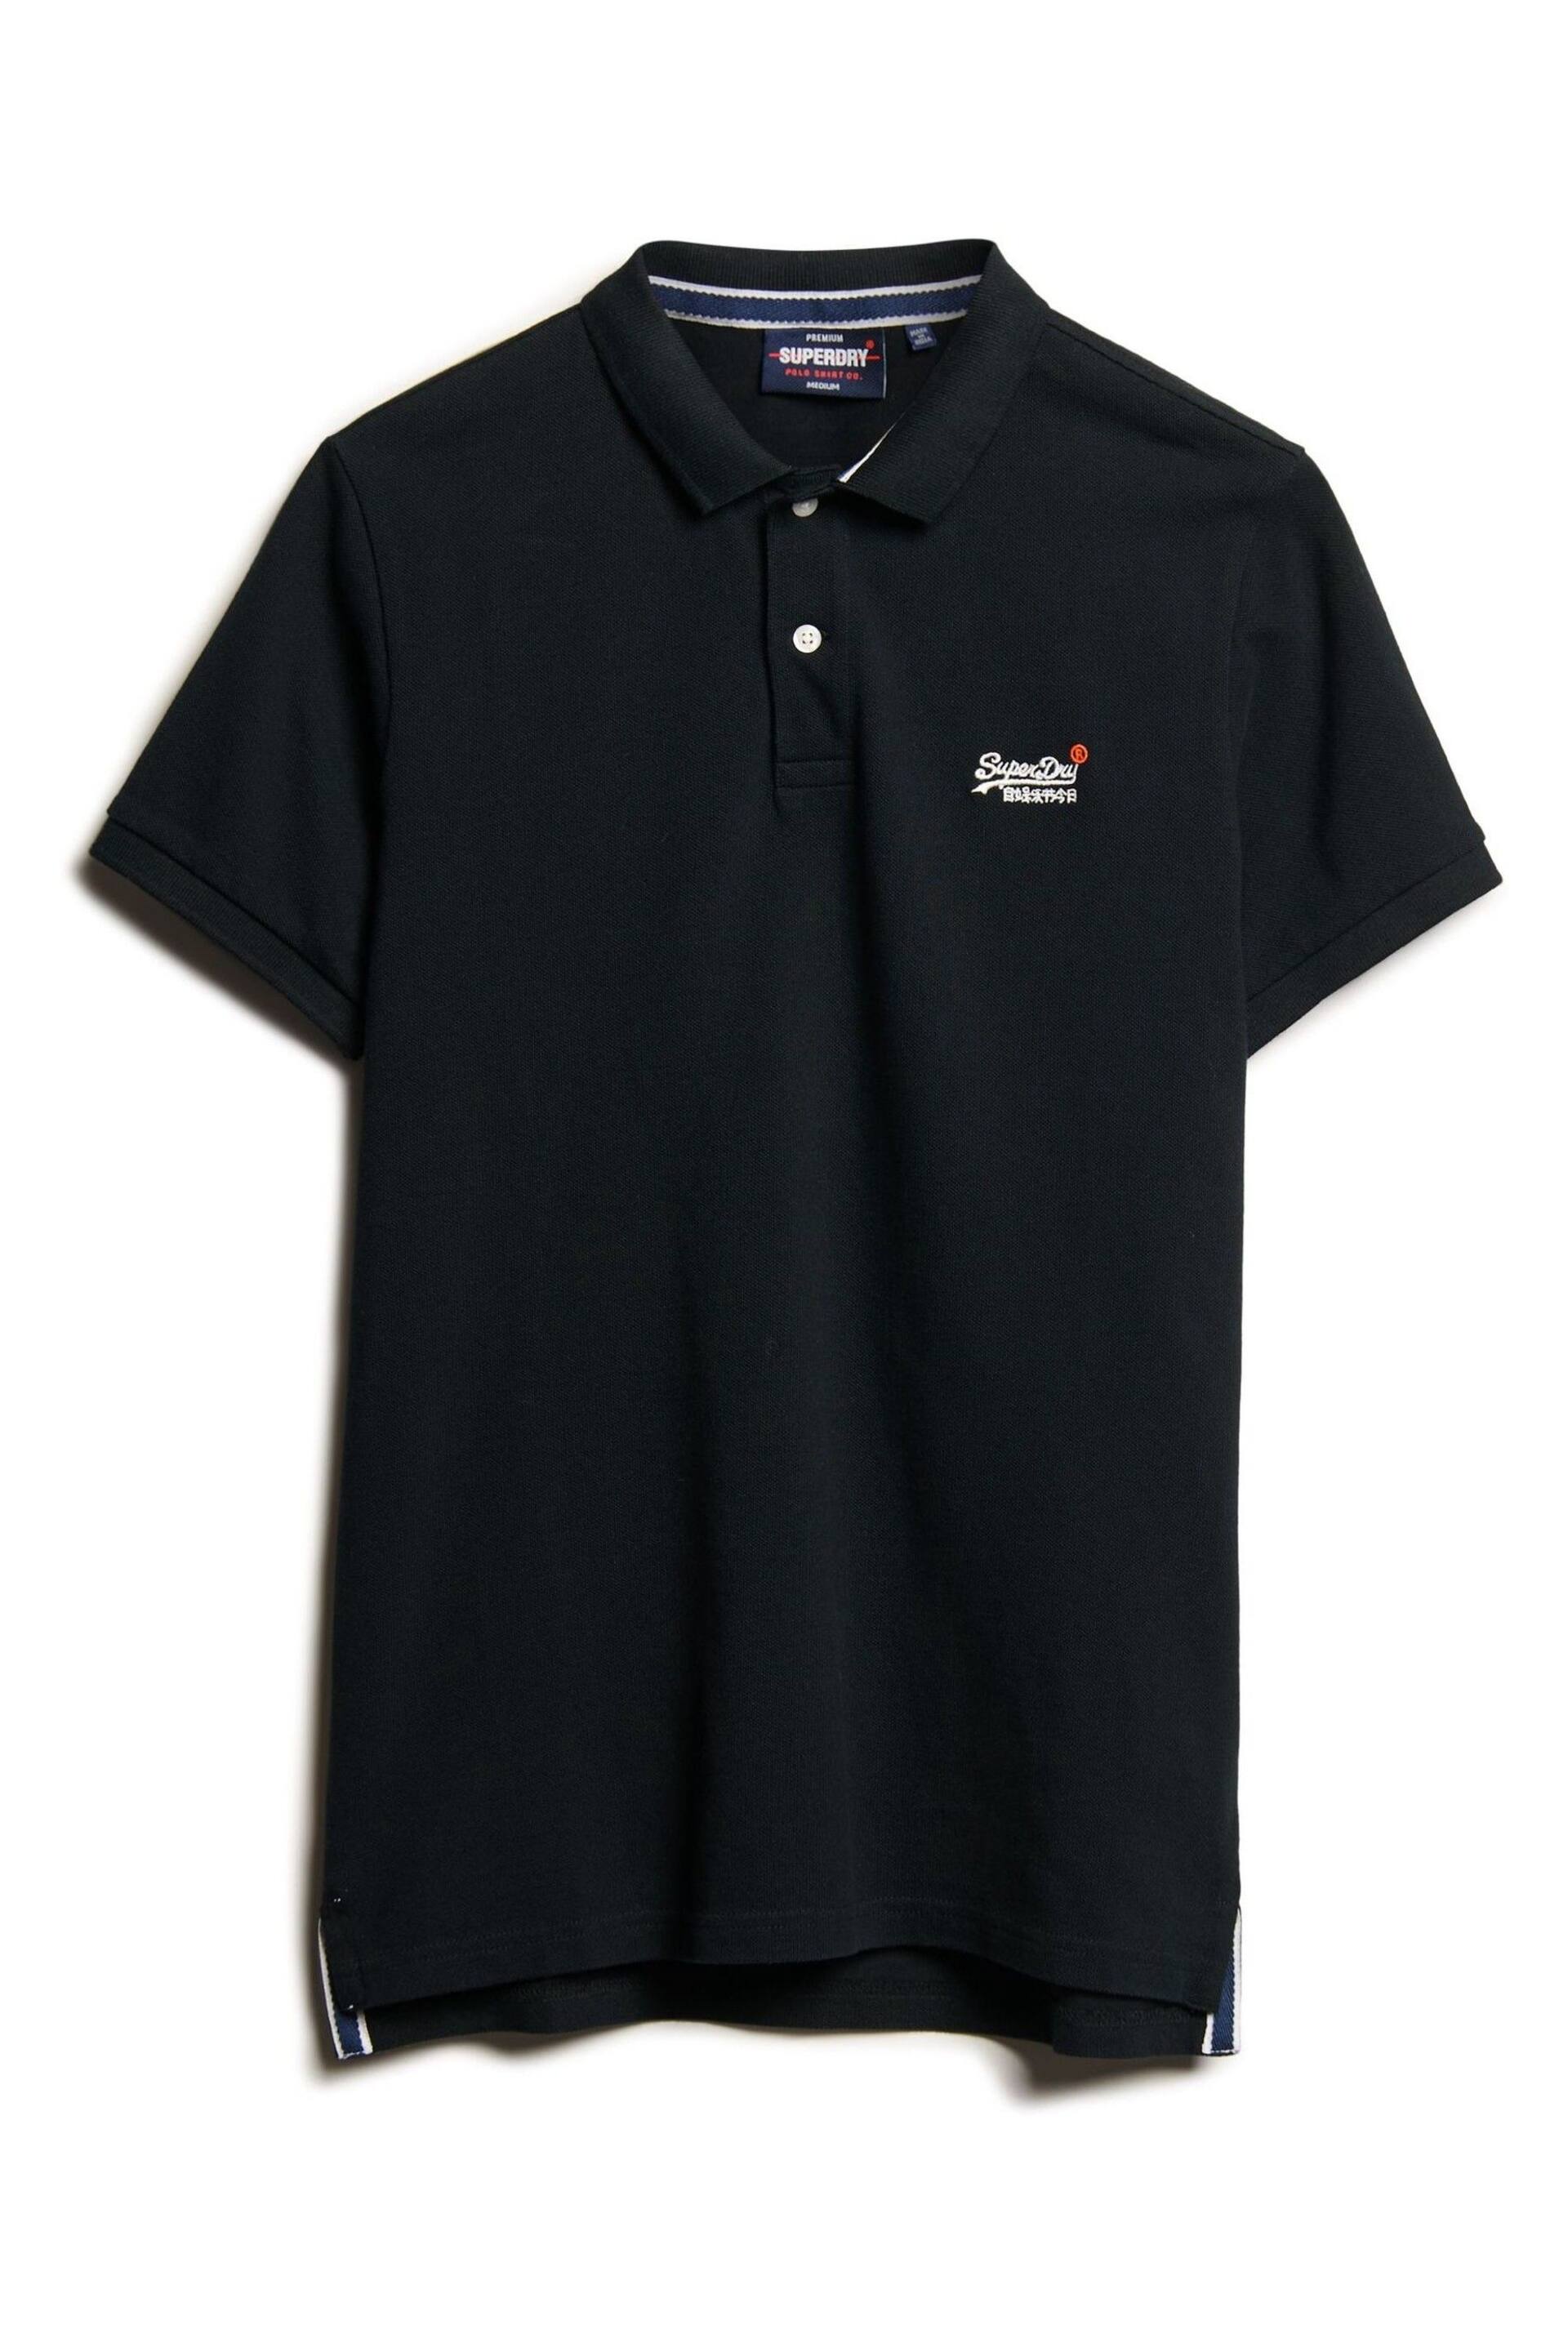 Superdry Black Classic Pique Polo Shirt - Image 7 of 9